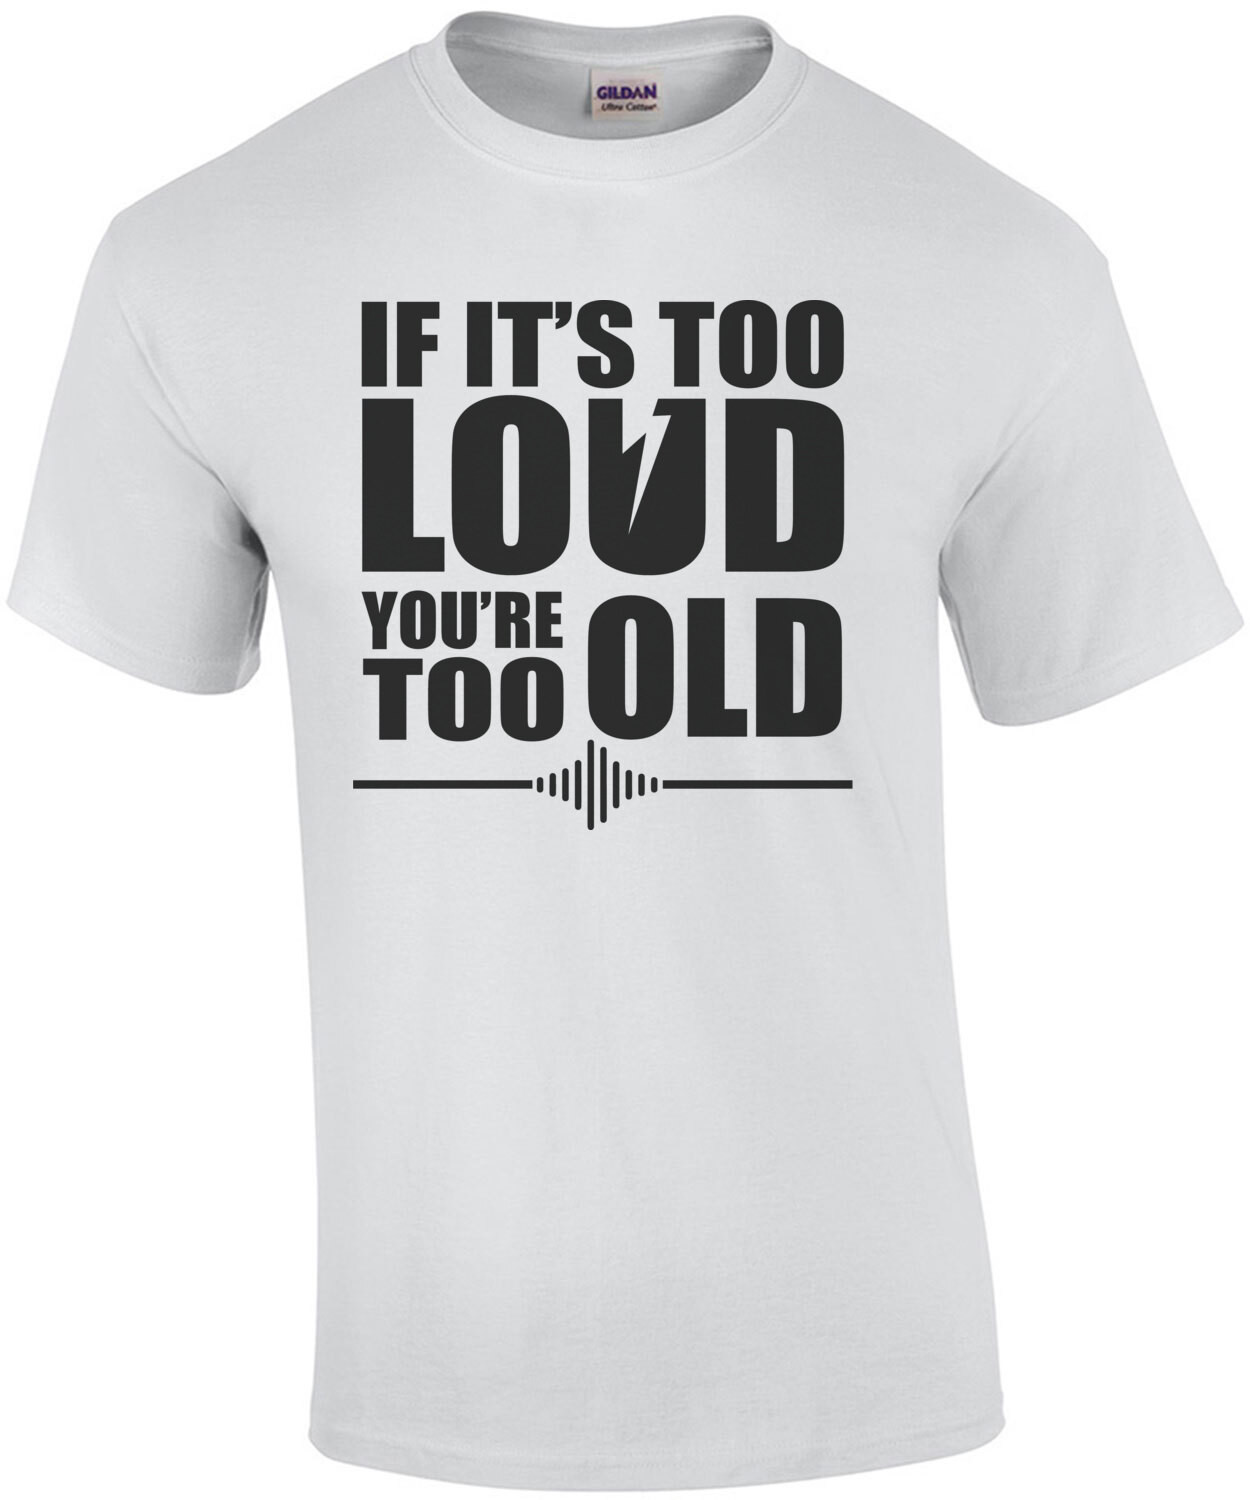 If it's too loud you're too old - funny rock and roll t-shirt